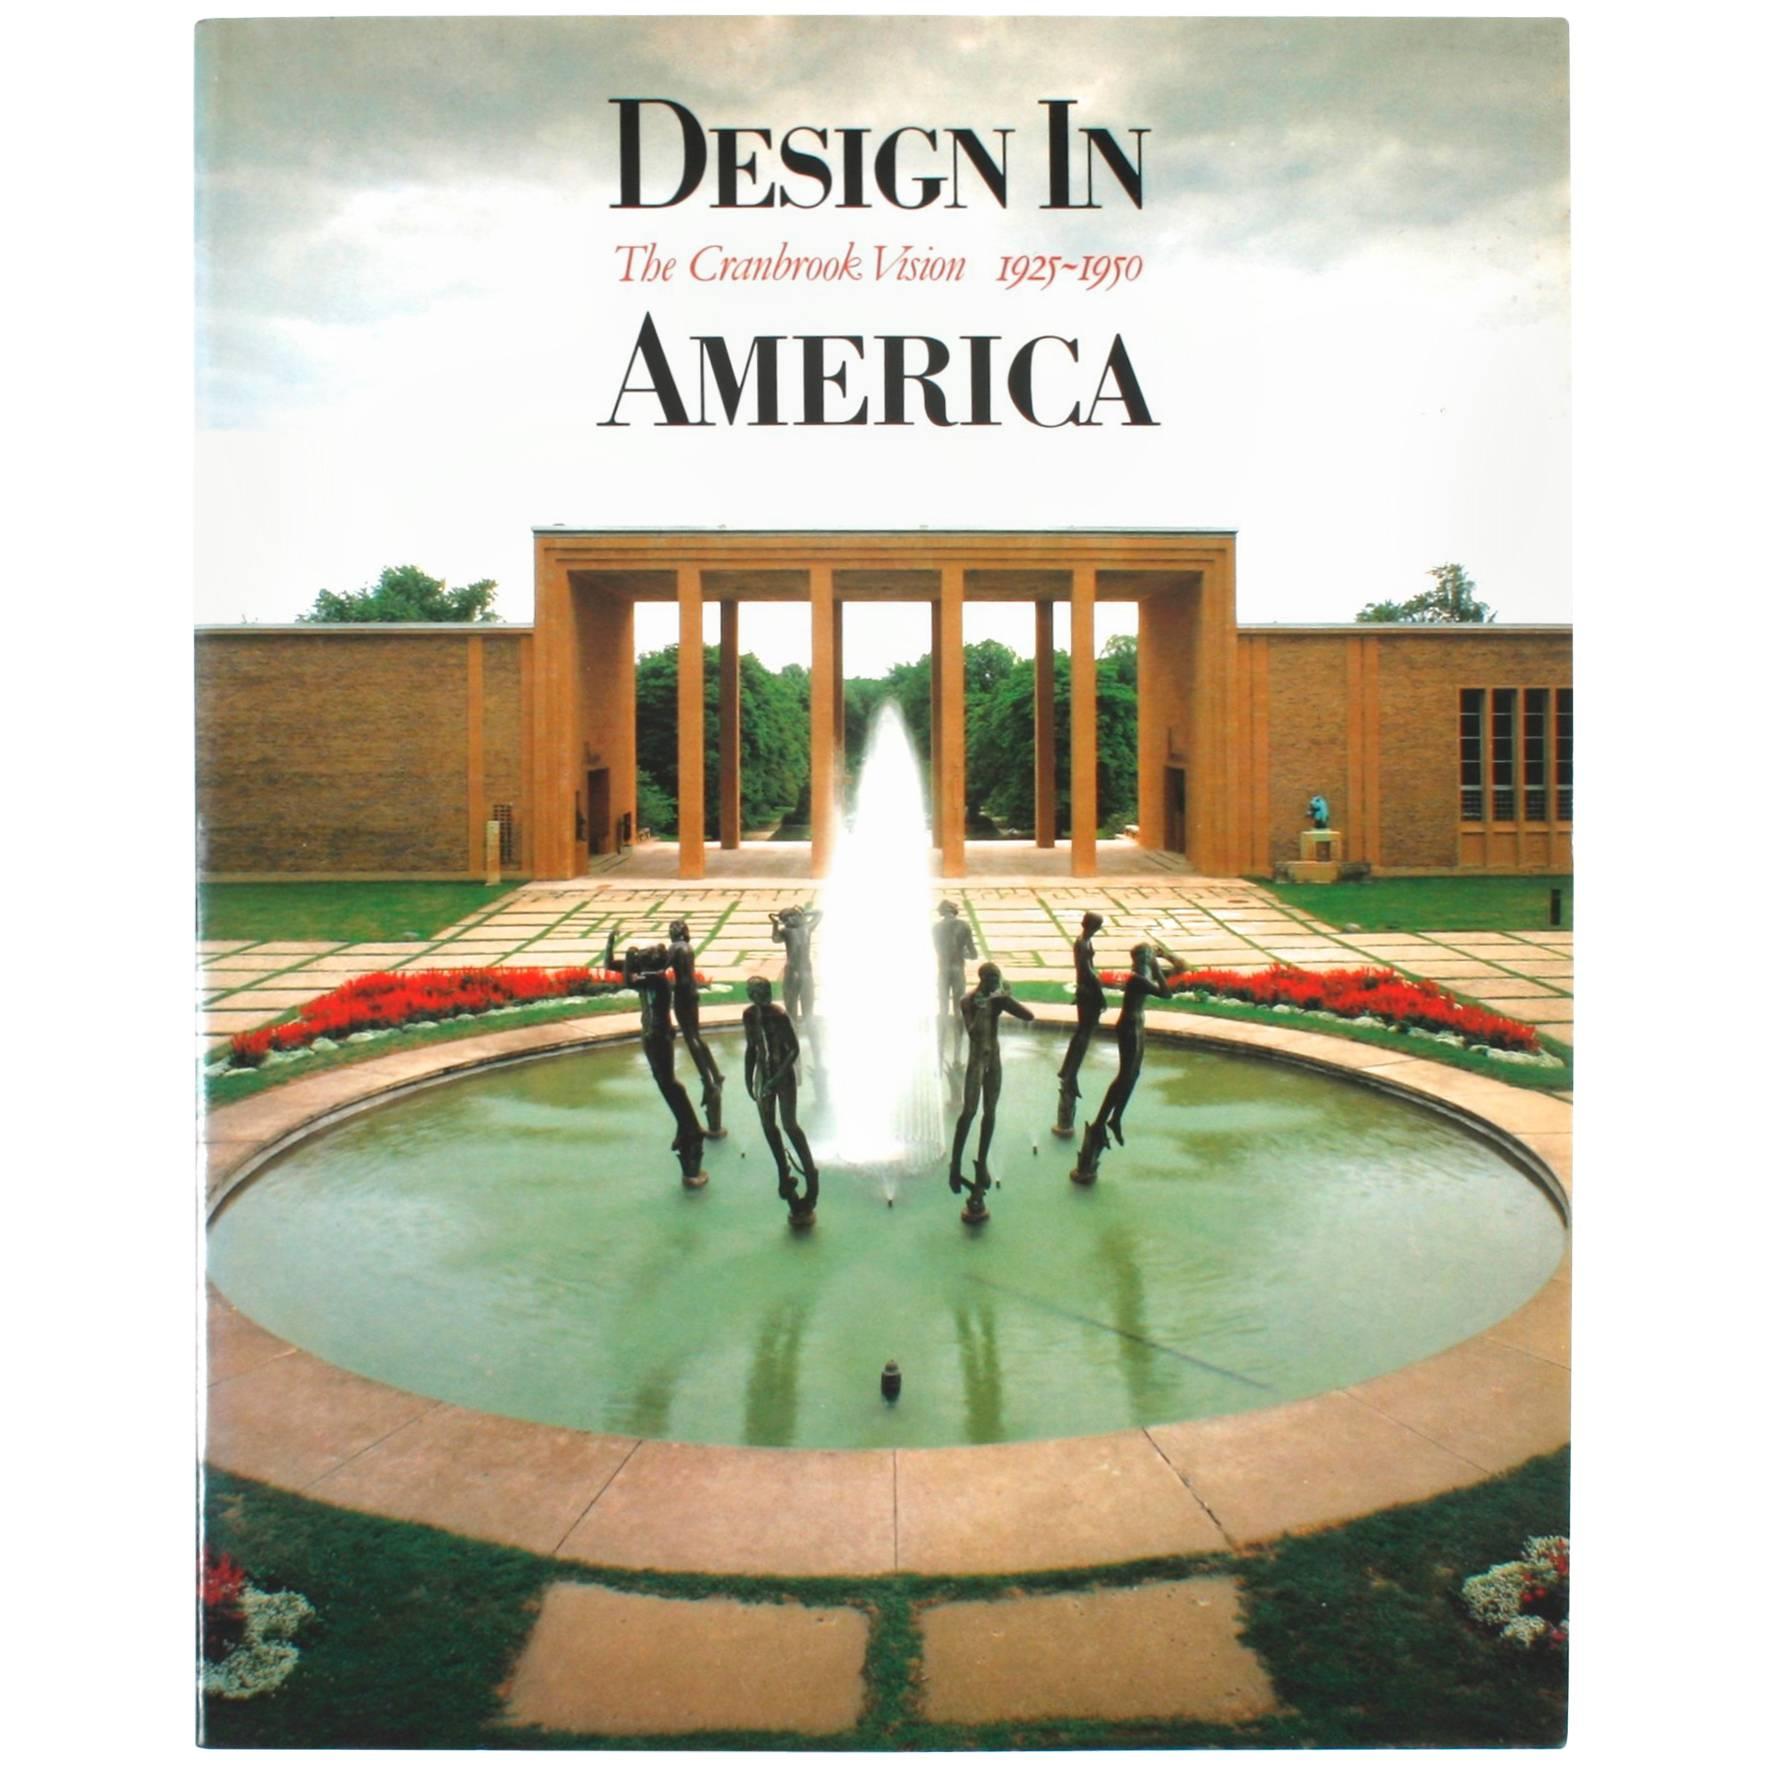 Design in America the Cranbrook Vision, 1925-1950 by Robert Judson Clark